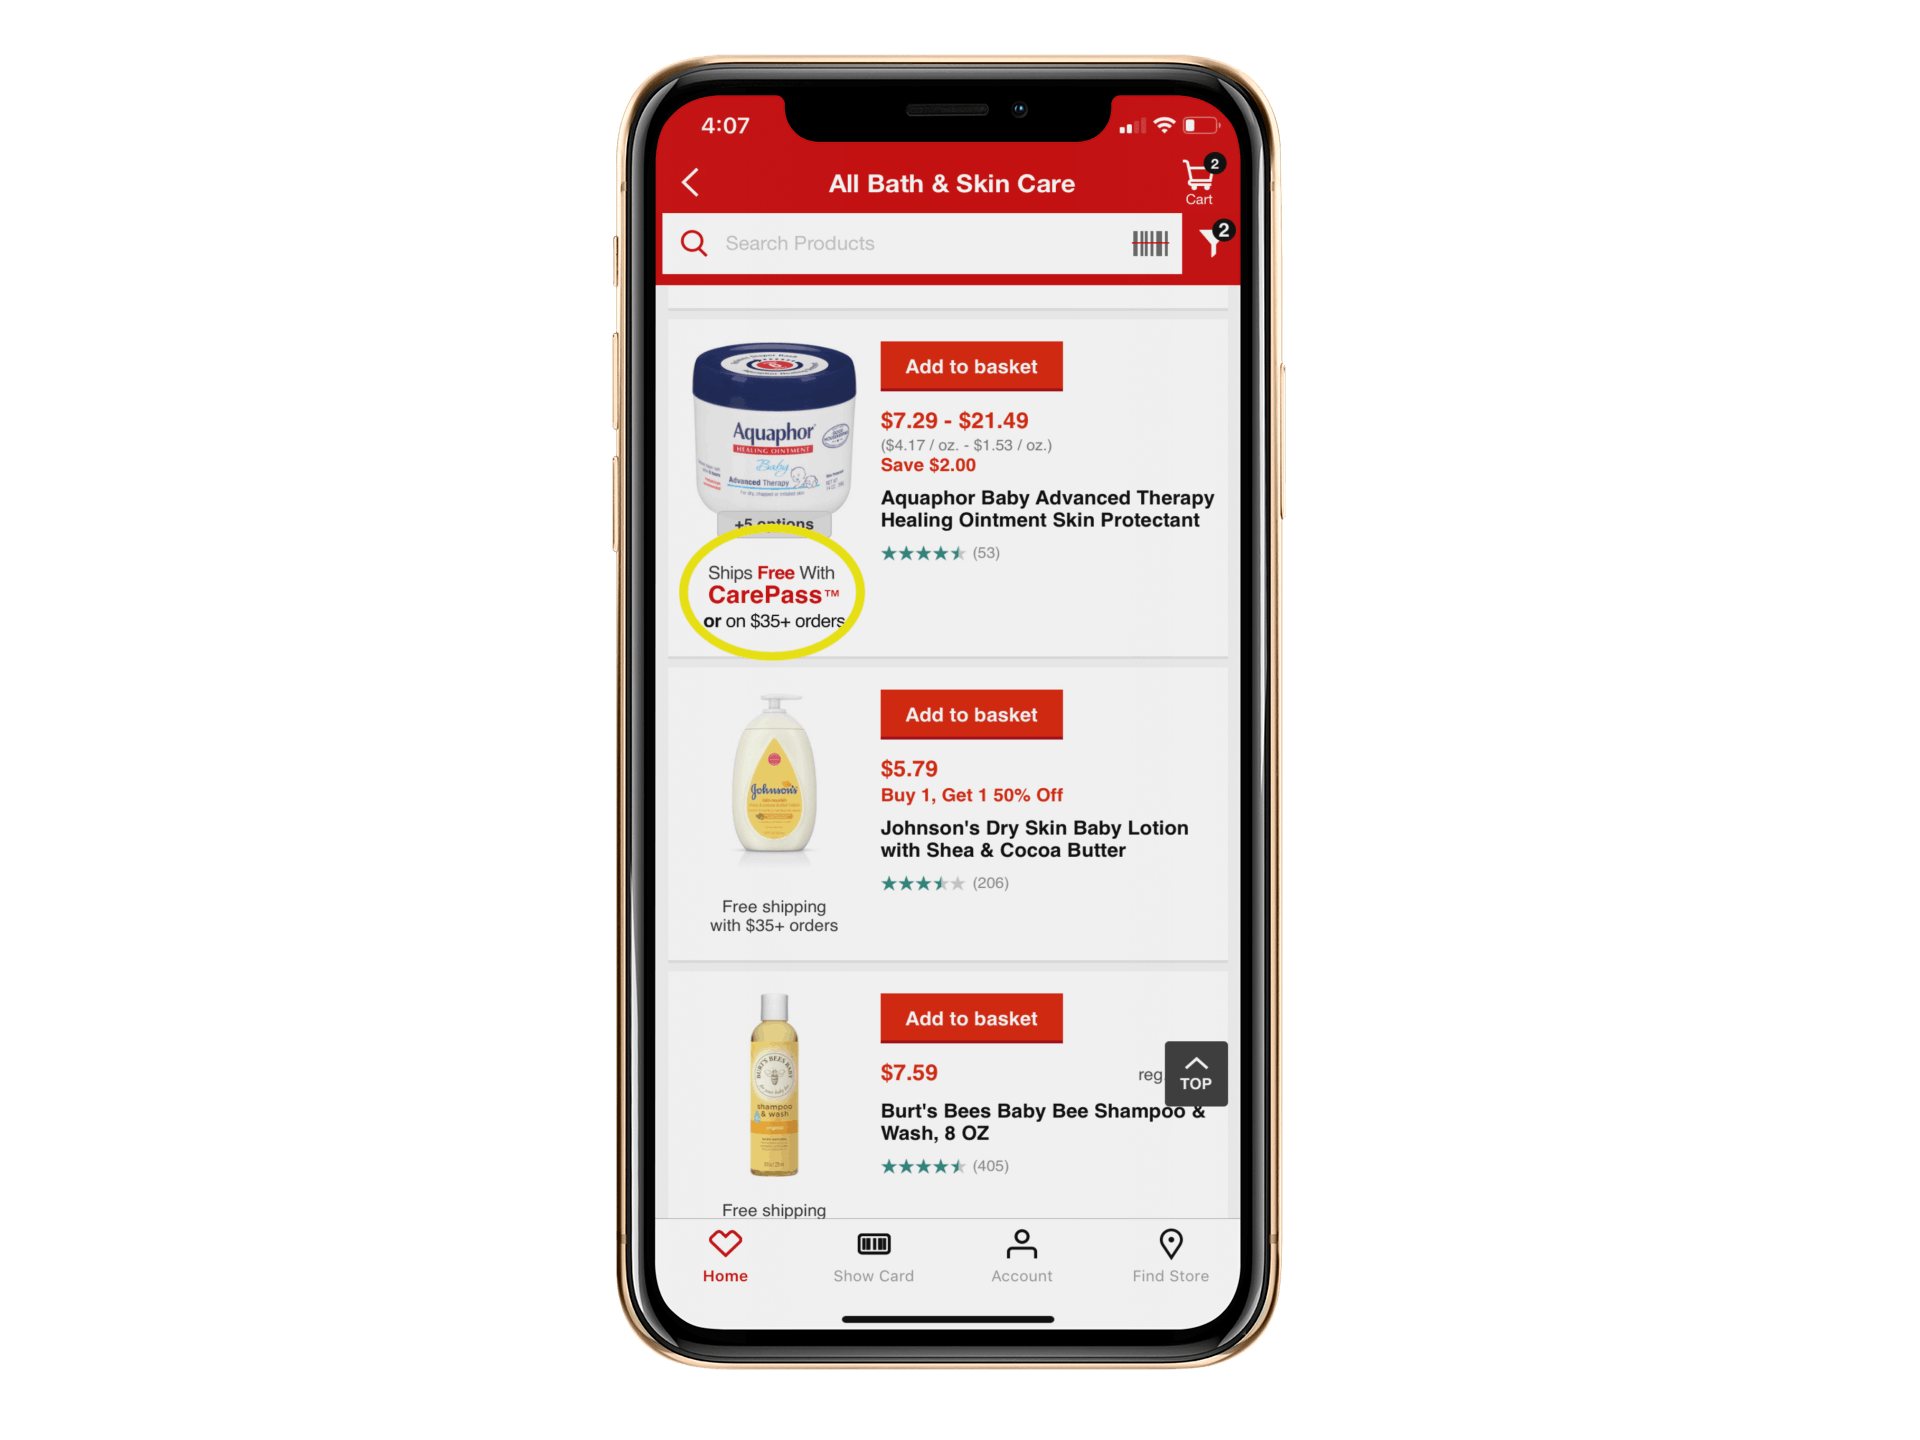 cvs app on iphone shows carepass items eligible for free shipping once $35 min order threshold met